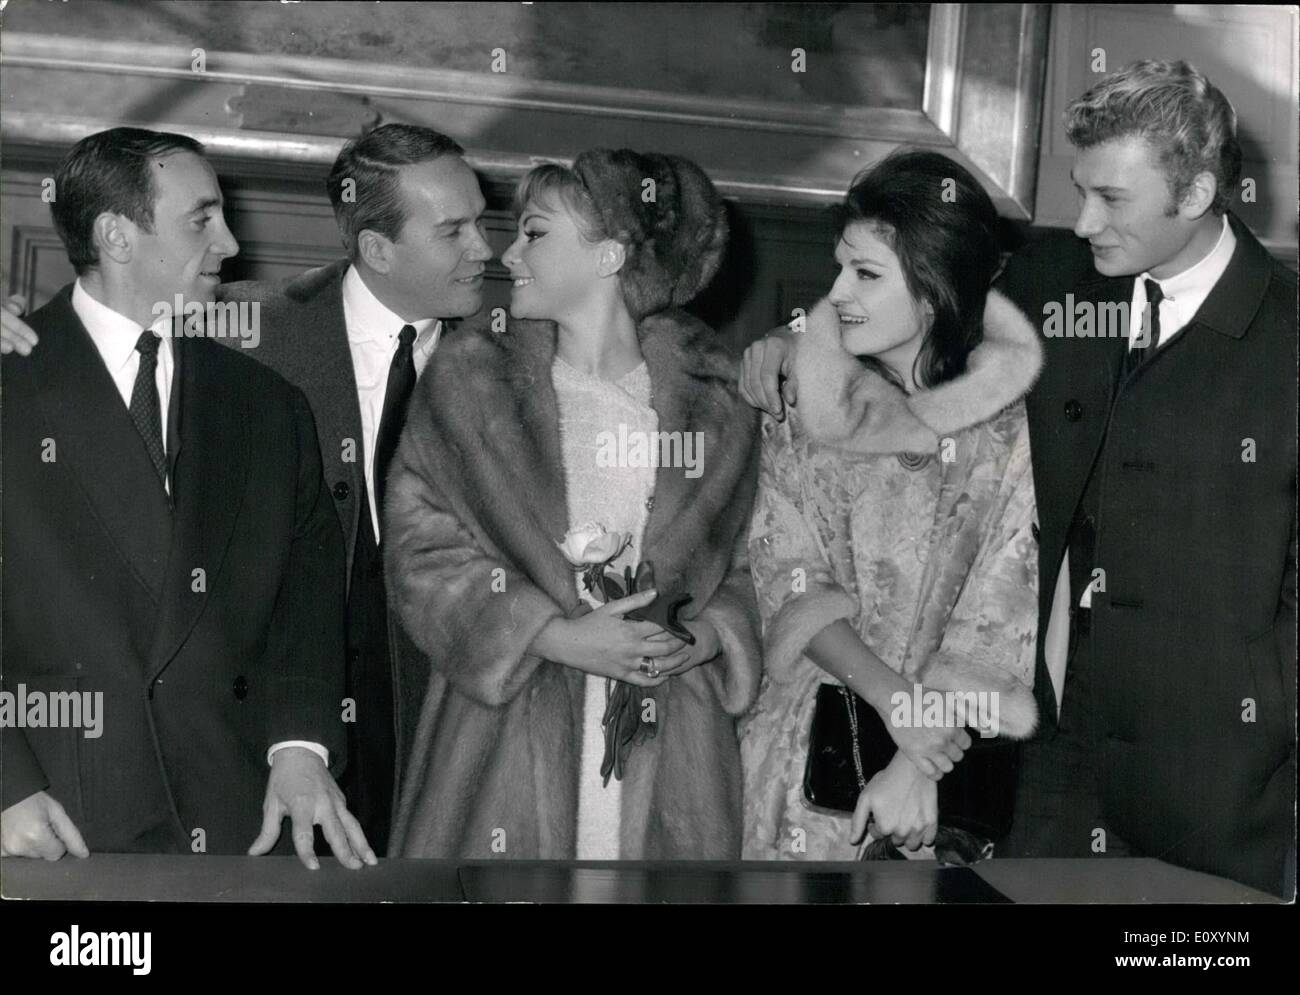 Apr. 04, 1968 - Cinemactress Gisele Sandre marries public relations man Richard Balducci: Ex Ski-Champion Gisele Sandre who became actress in picture called :Les Jeunes filles De Bonne Familles'' married today Richard Balducci who was public-relation man for the film. Singers Charles Aznavour, Dalida and Johnny Halliday assisted civil wedding. Photo Shows L to R: Charles Aznavour, Mr. & Mrs. Balducci, Dalida and Johnny Halliday. Stock Photo